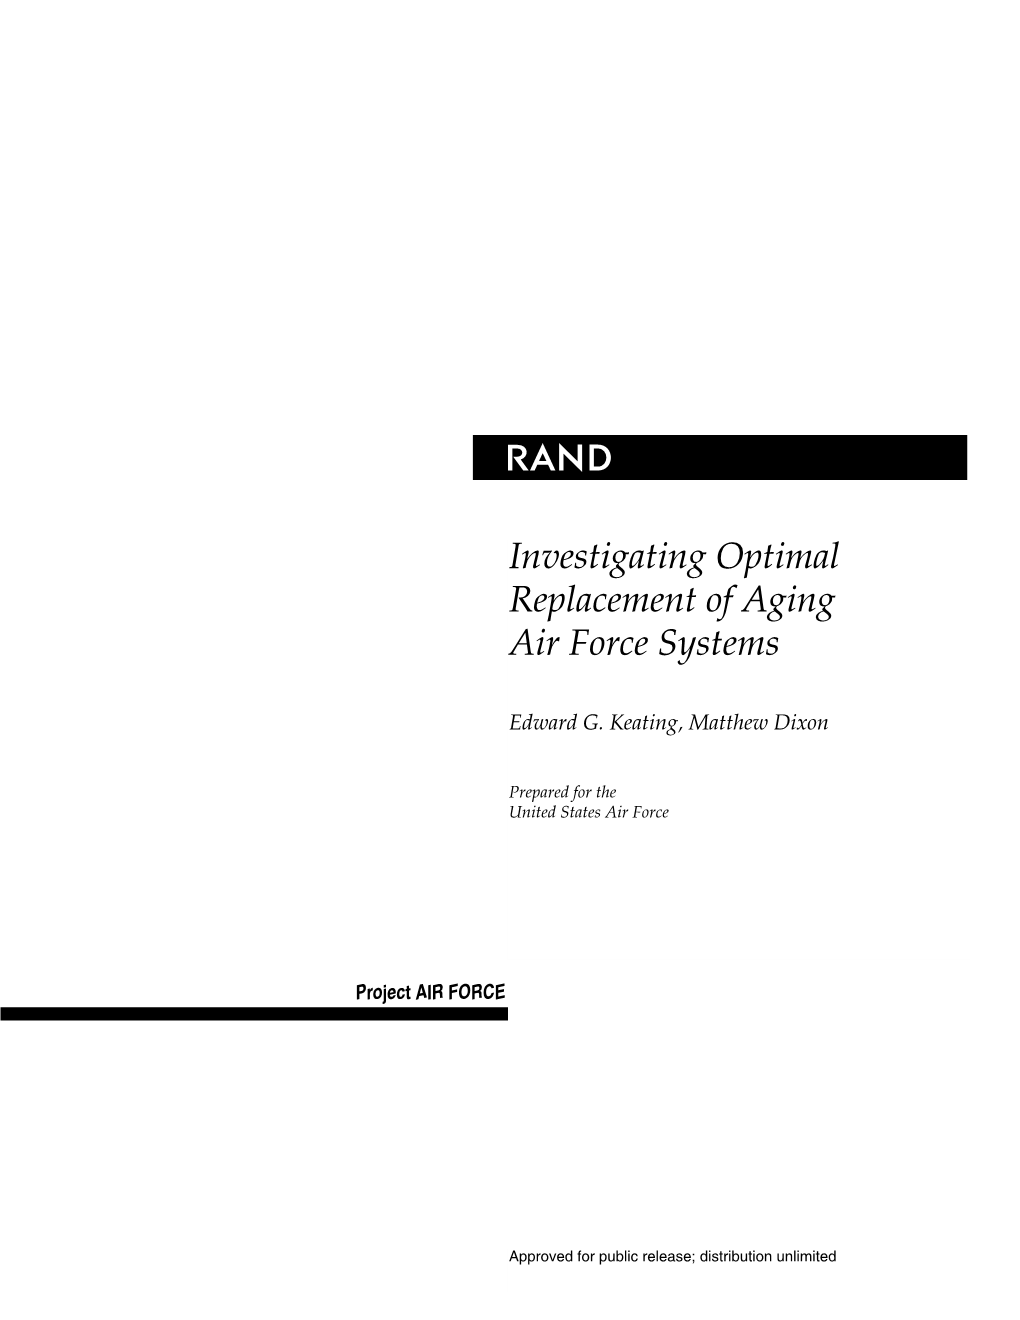 Investigating Optimal Replacement of Aging Air Force Systems